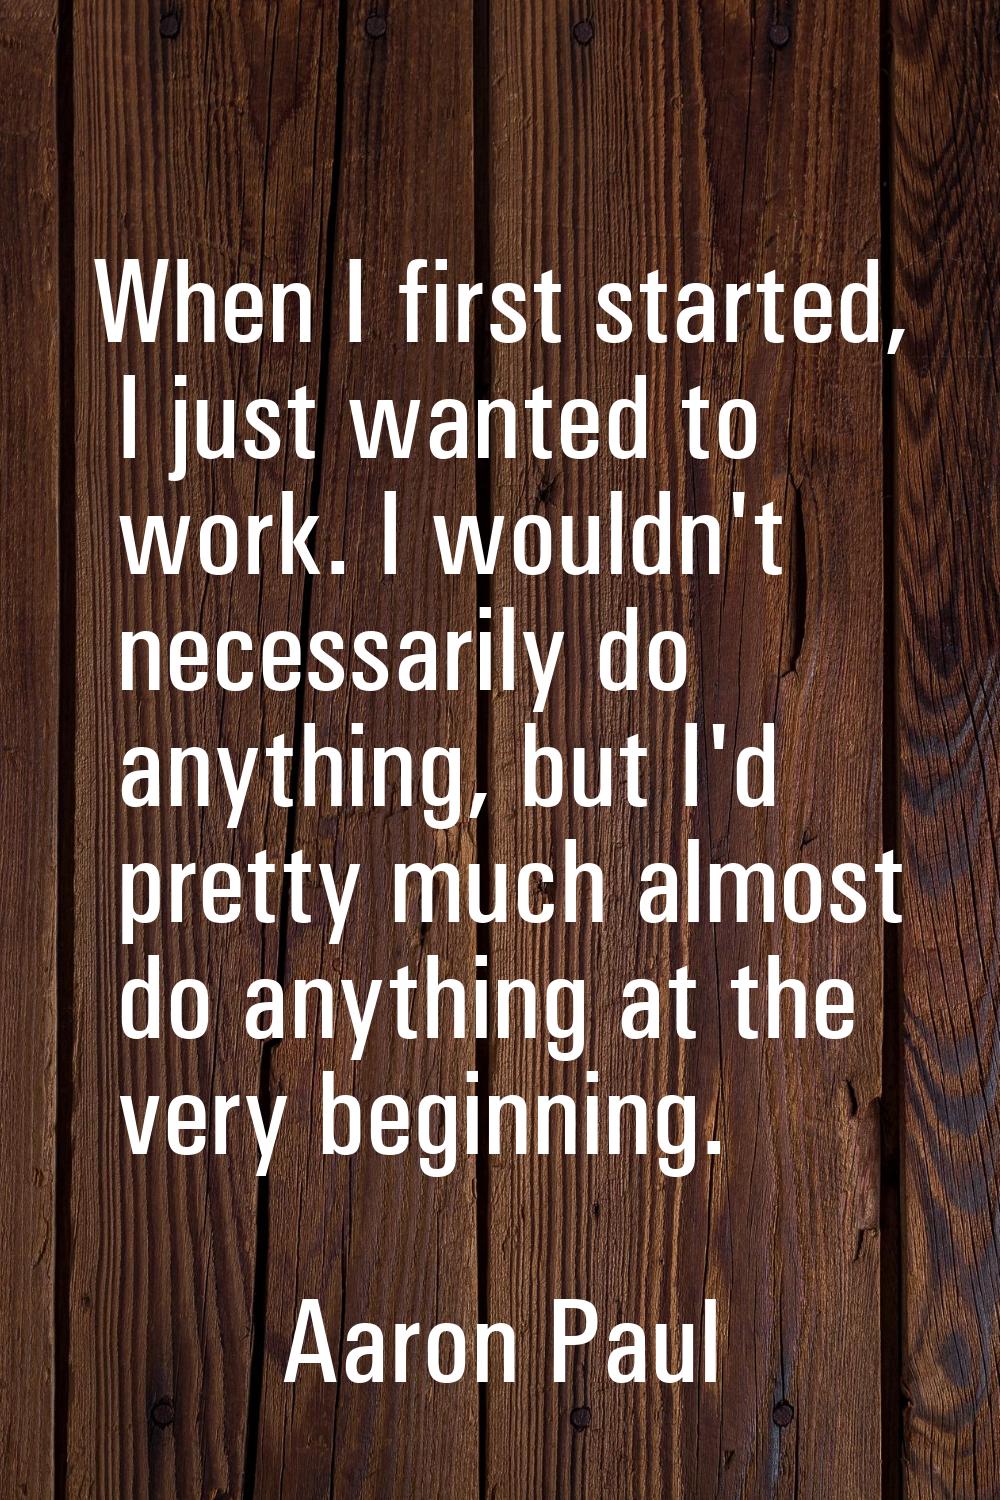 When I first started, I just wanted to work. I wouldn't necessarily do anything, but I'd pretty muc